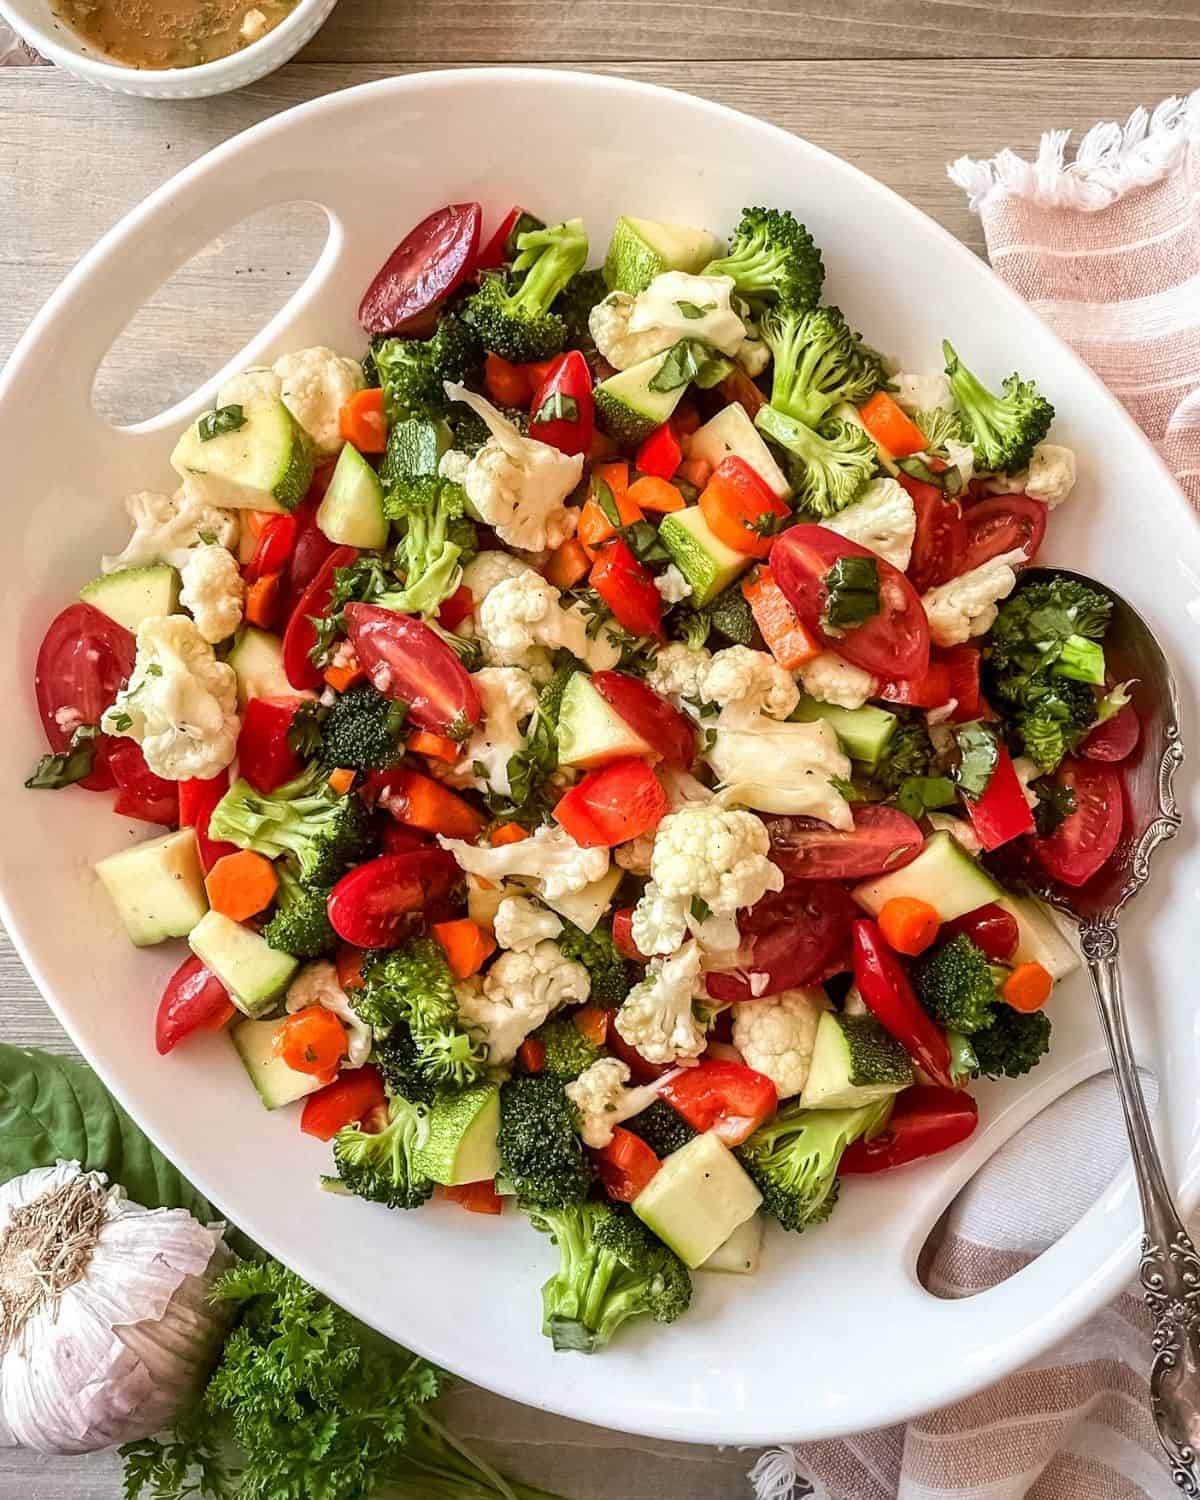 Marinated vegetable salad in a round white serving dish, with a large spoon, napkin on the side, bowl of marinade at the top, garlic and fresh herbs on the bottom left.